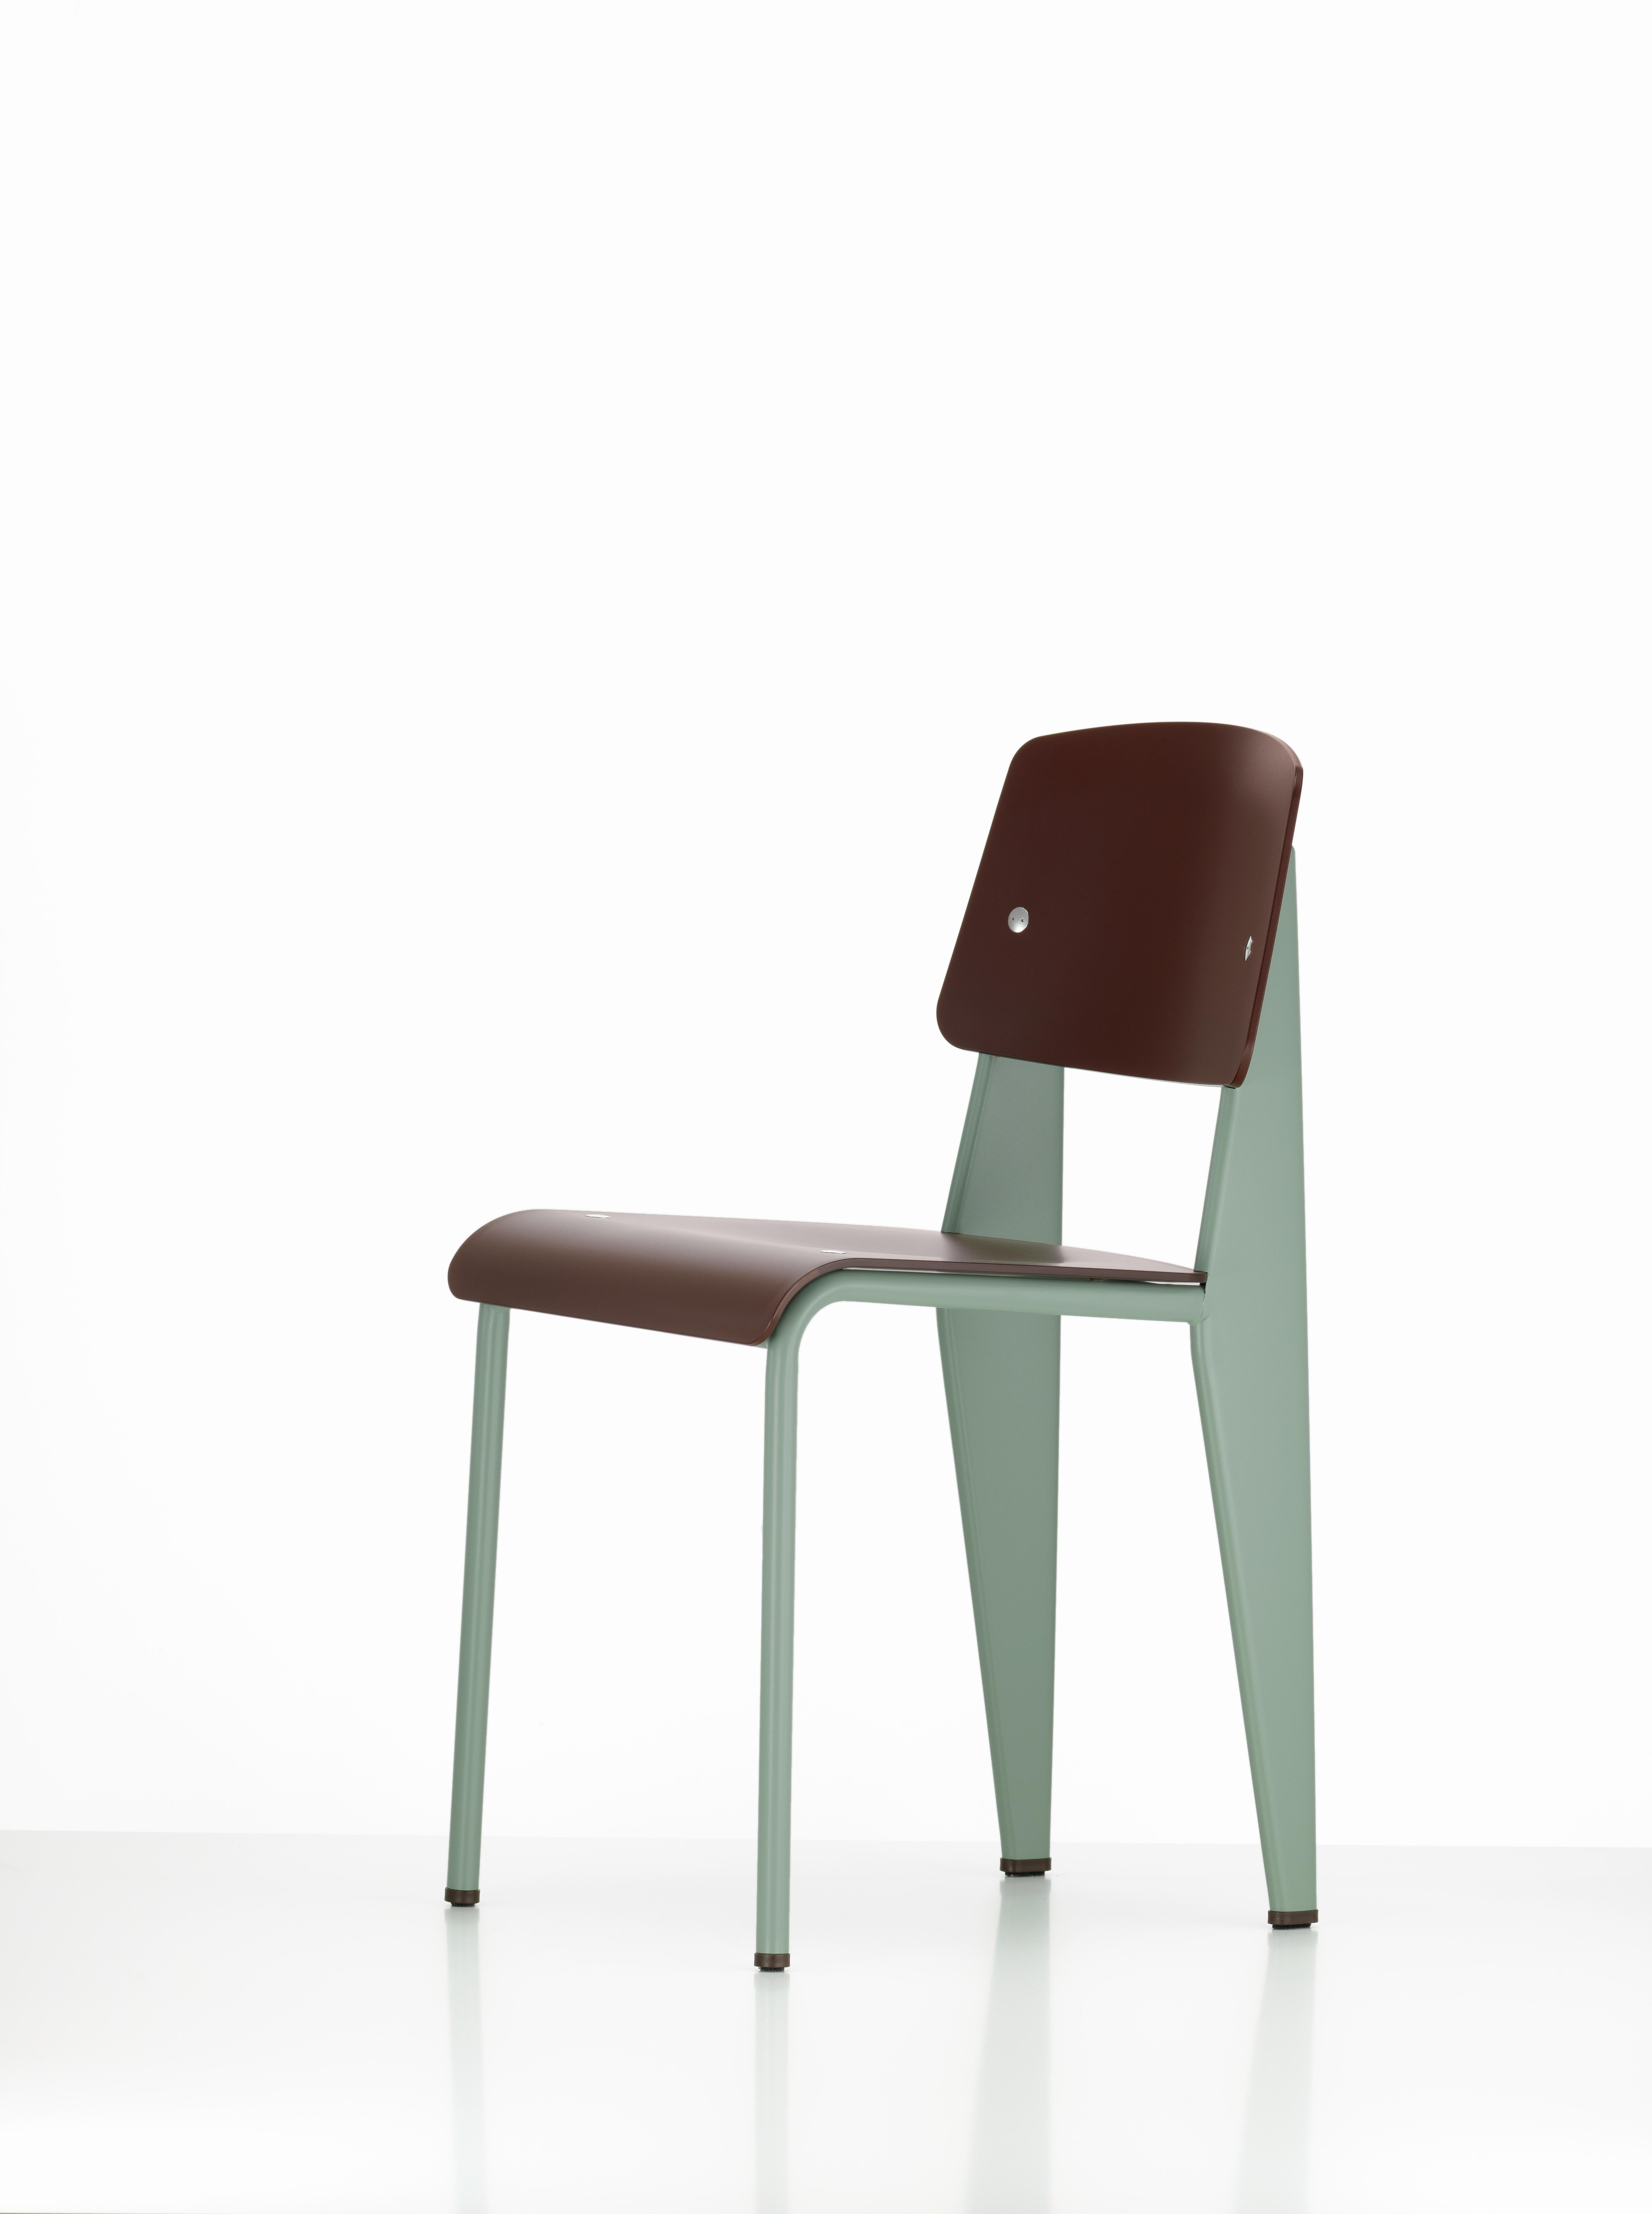 Jean Prouvé Standard Chair SP in Teak Brown and Red for Vitra 2